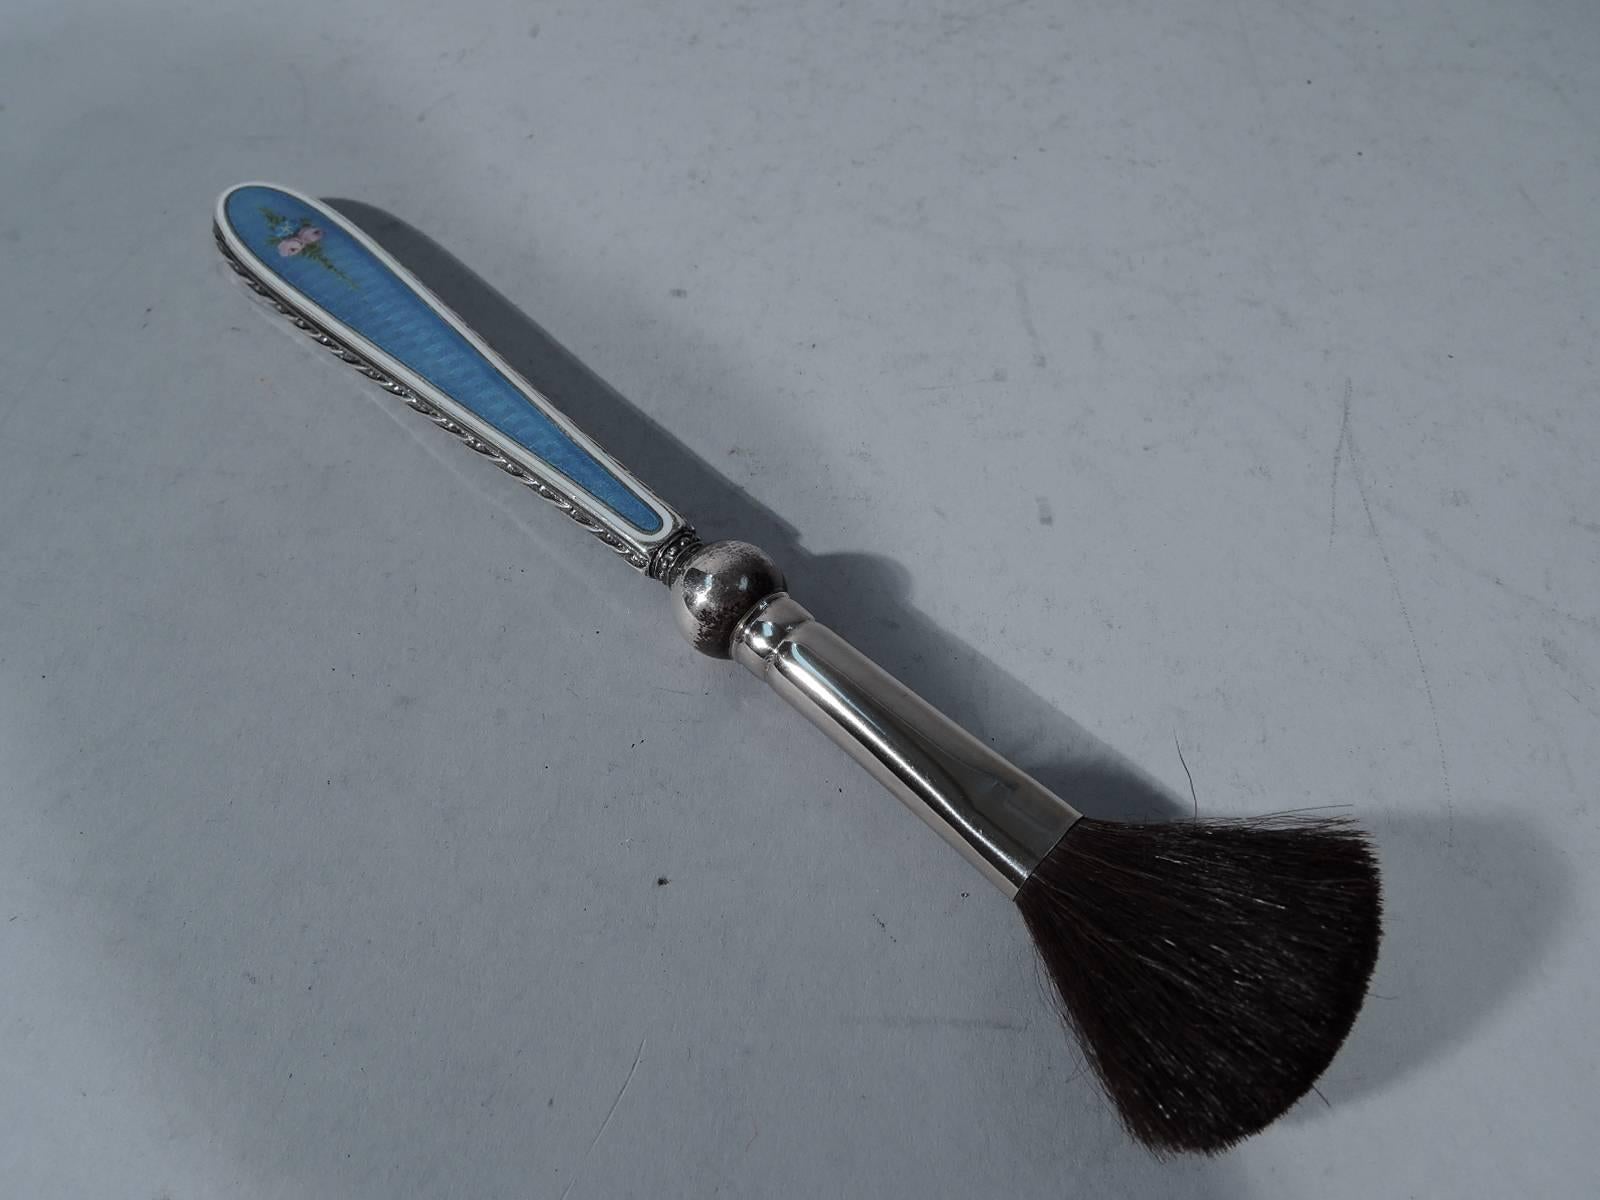 Antique Edwardian sterling silver powder brush. Tapering handle with double-sided enameled flowers on blue ground and silver imbricated leaf ornament. Hallmarked “sterling”. Fine condition with new bristles.

Length: 7 3/4 in. BO390.